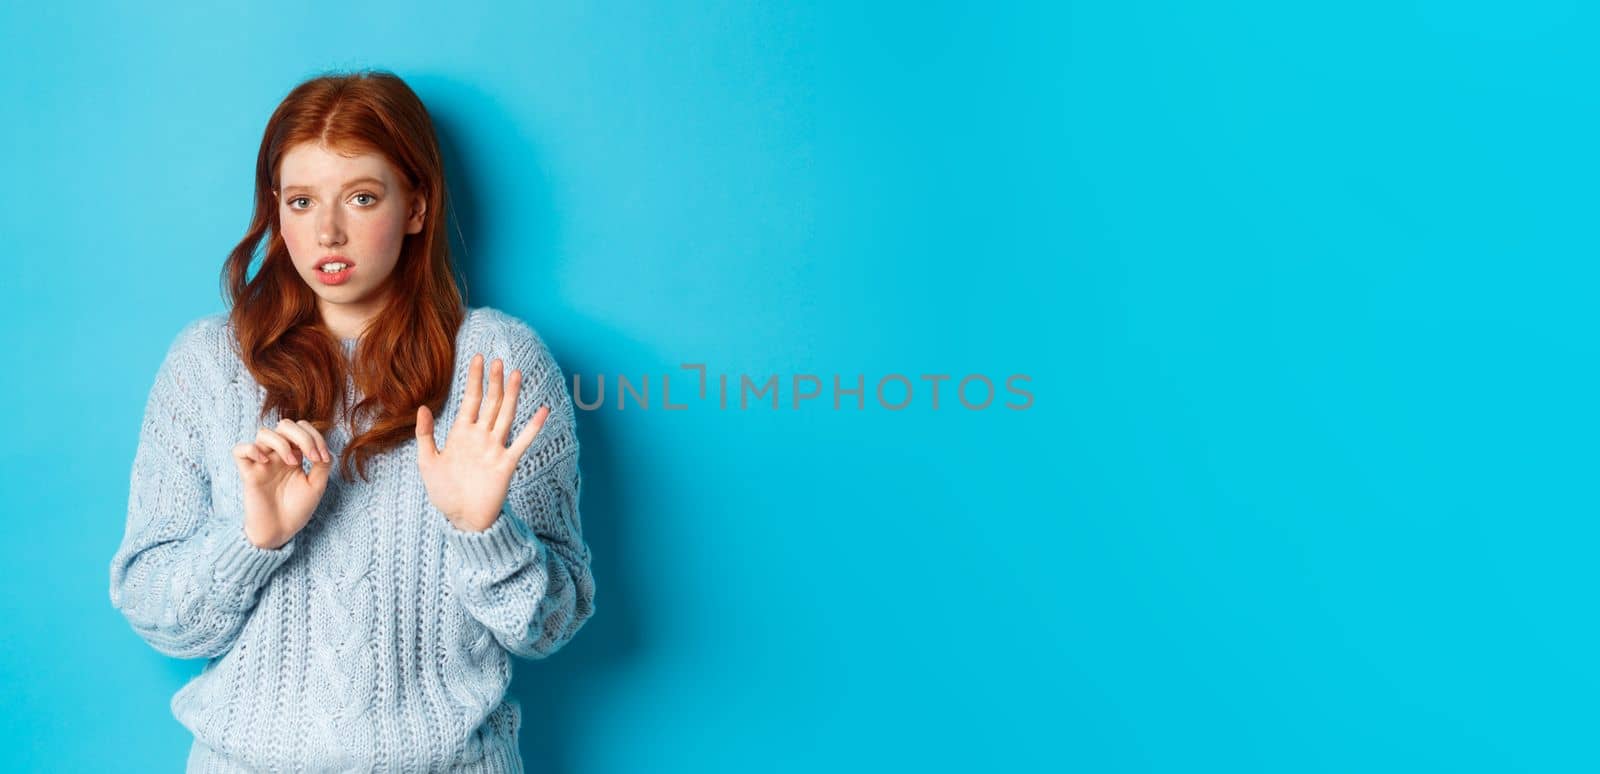 Worried redhead girl refusing or declining an offer, shaking hands and looking anxiously at camera, rejecting something unpleasant, standing over blue background by Benzoix